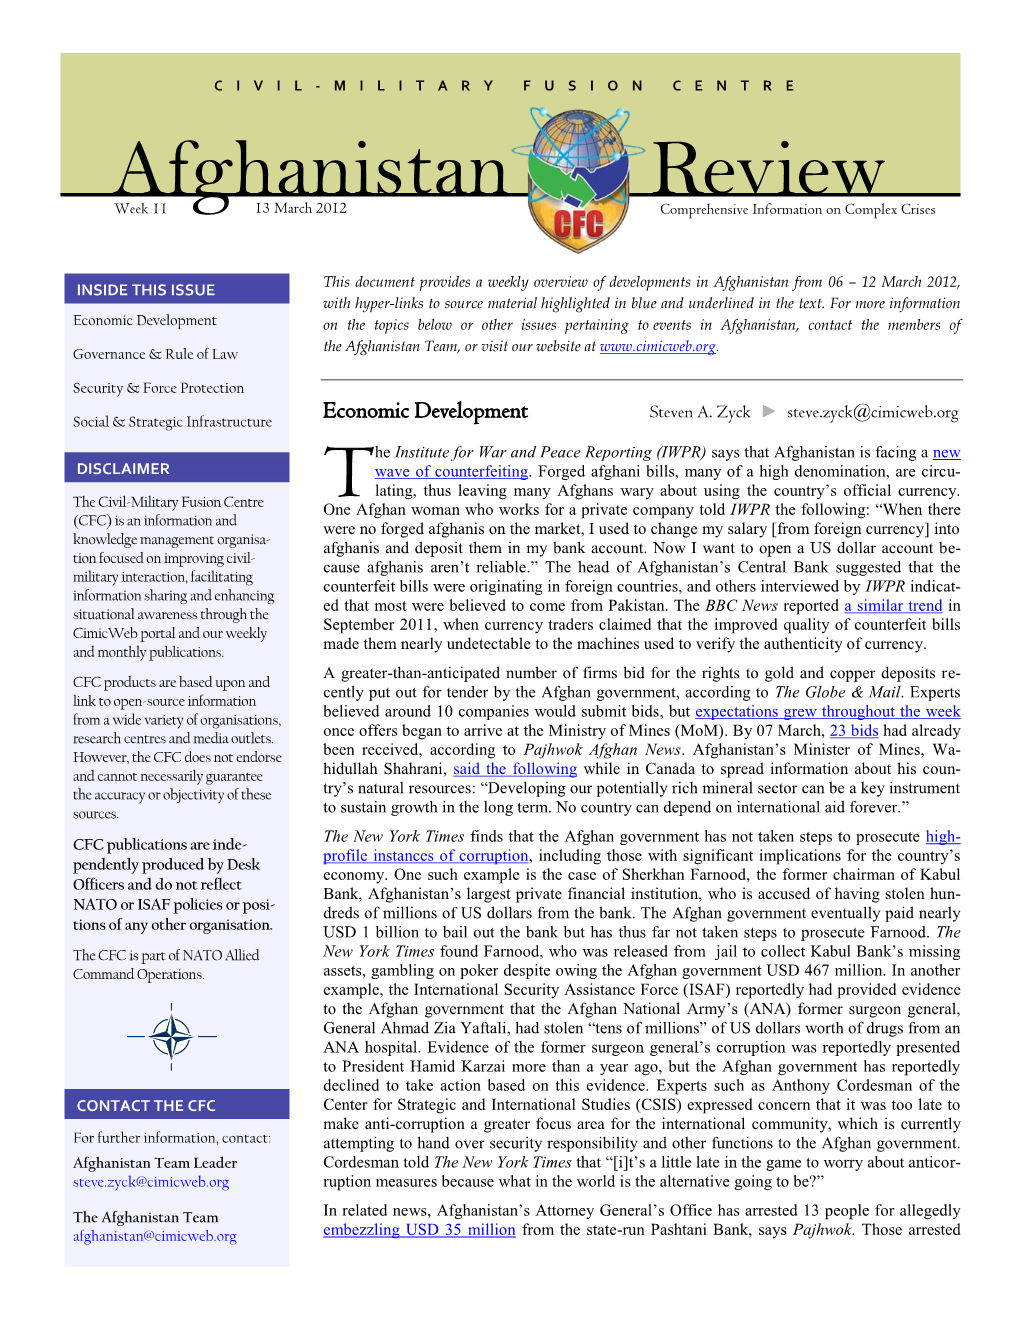 Afghanistan Review Week 11 13 March 2012 Comprehensive Information on Complex Crises